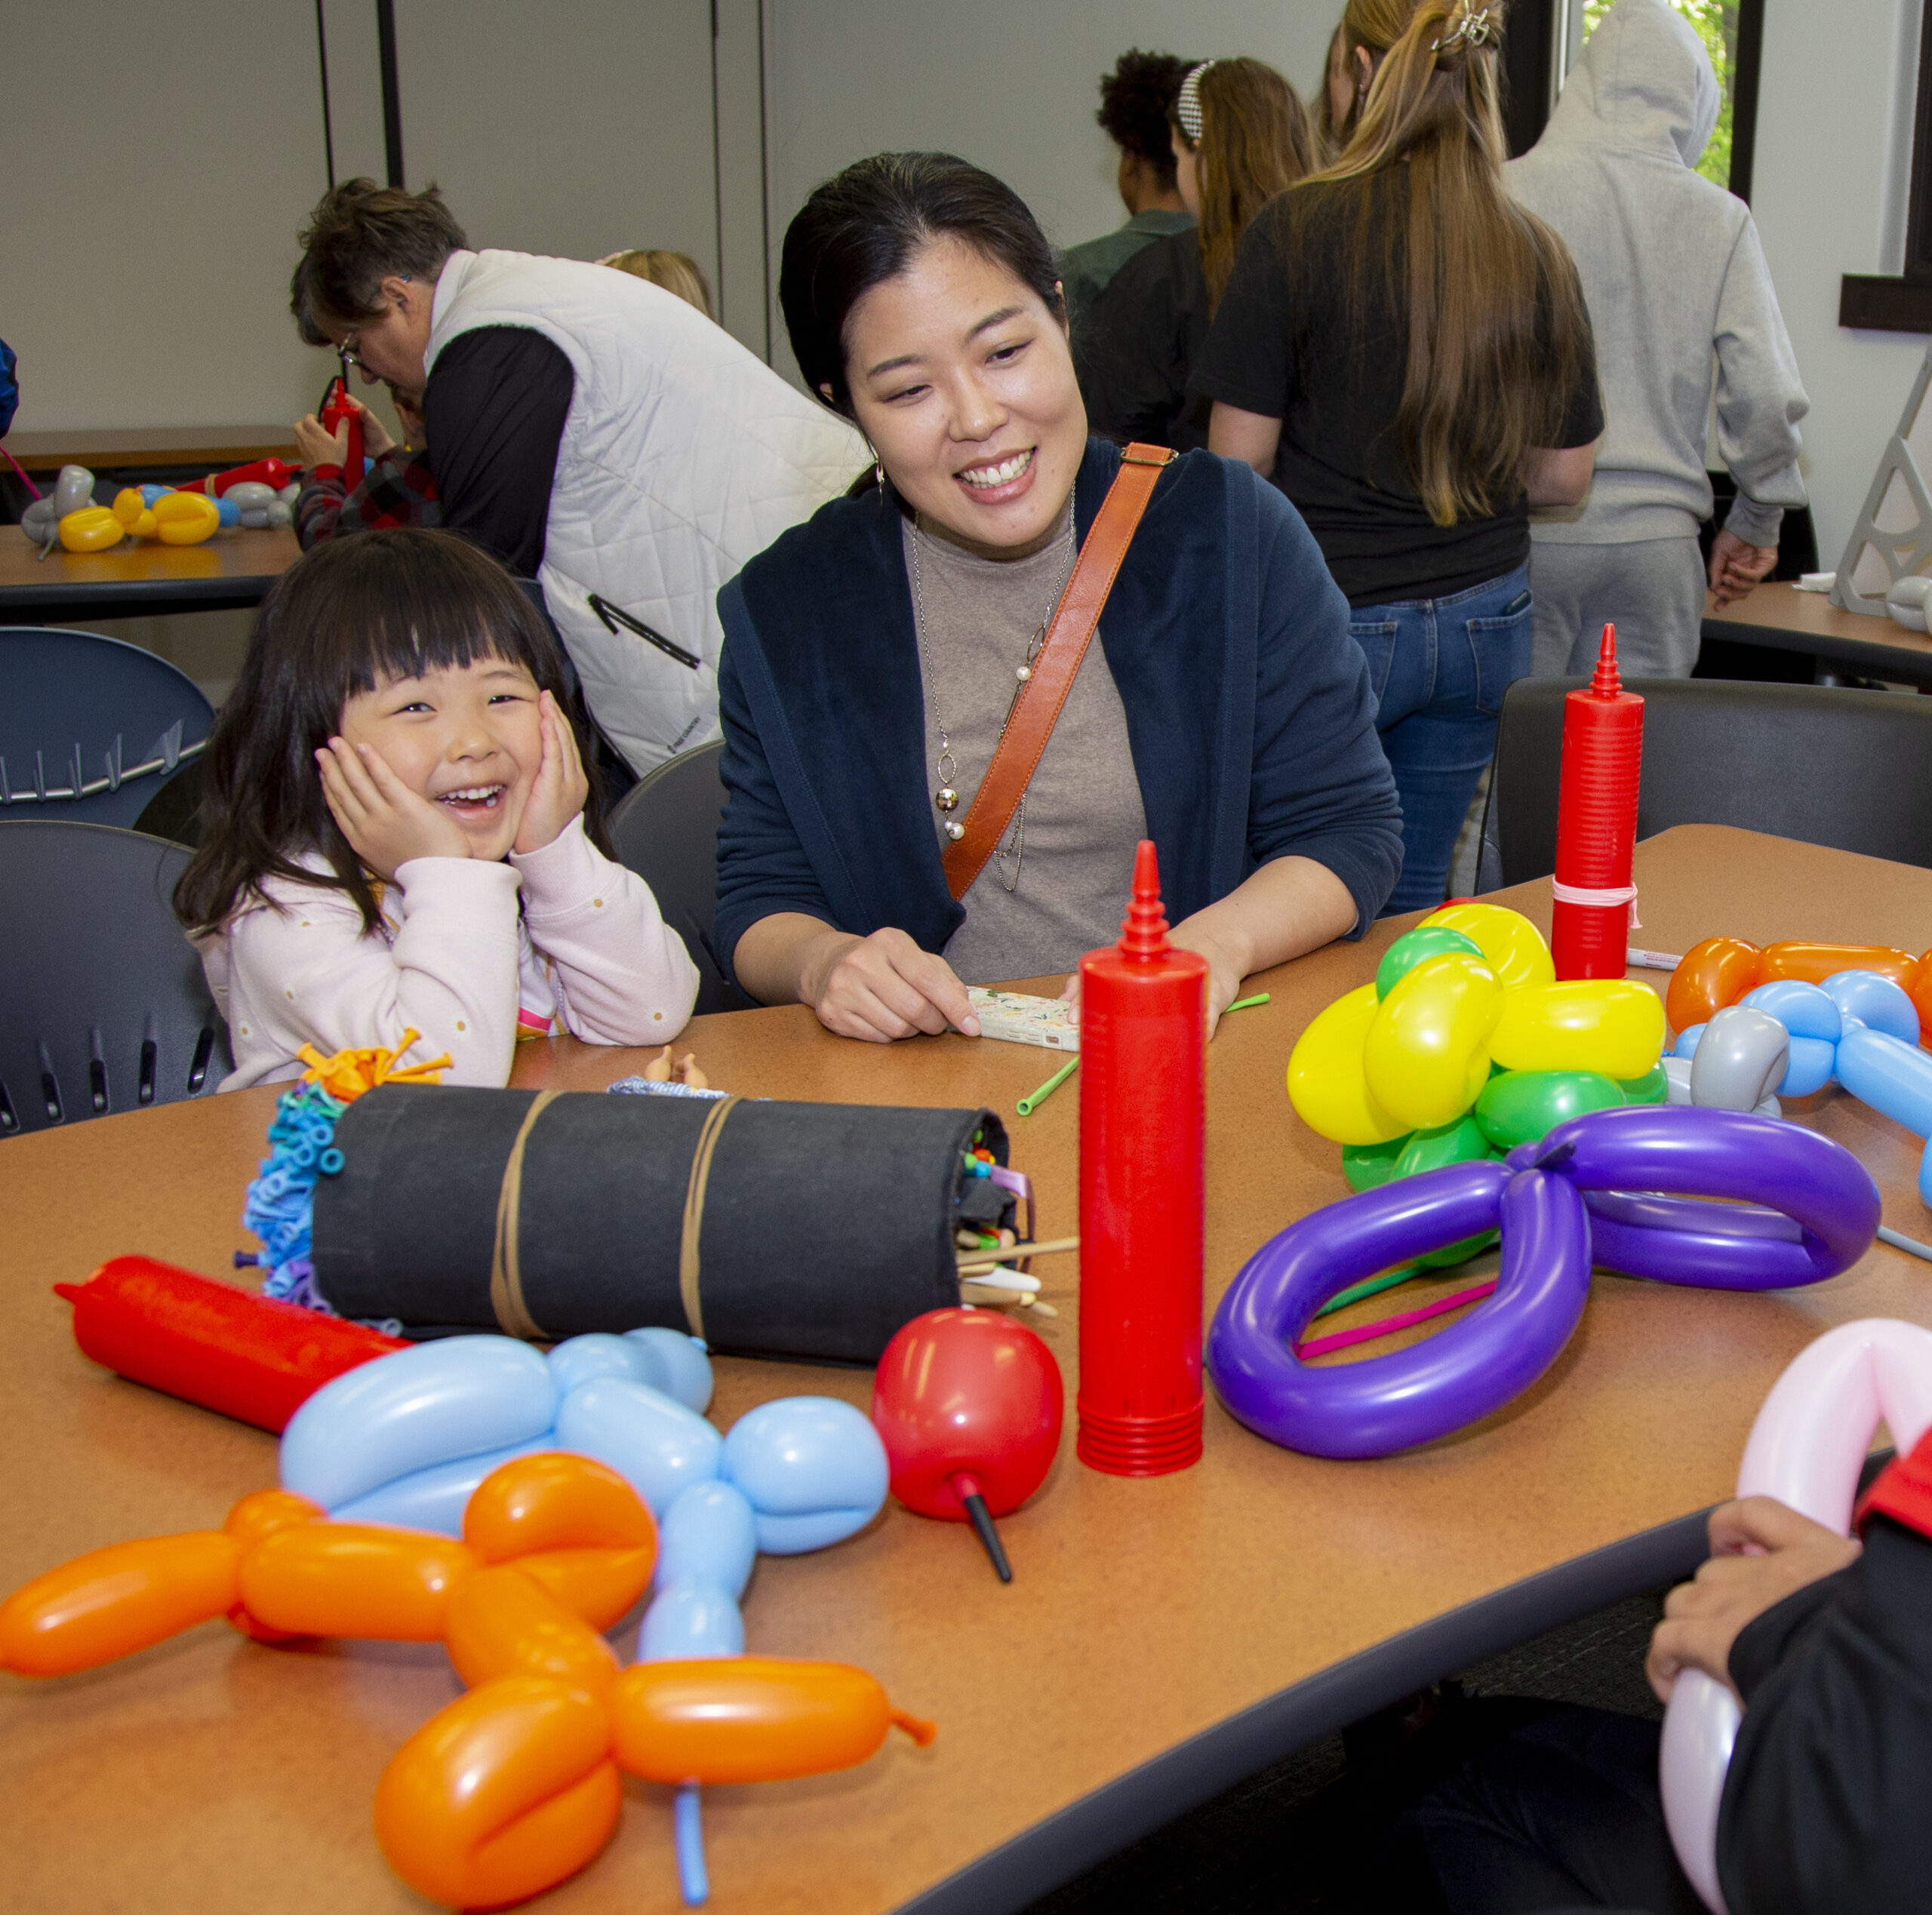 A child and her mother make balloon animals.